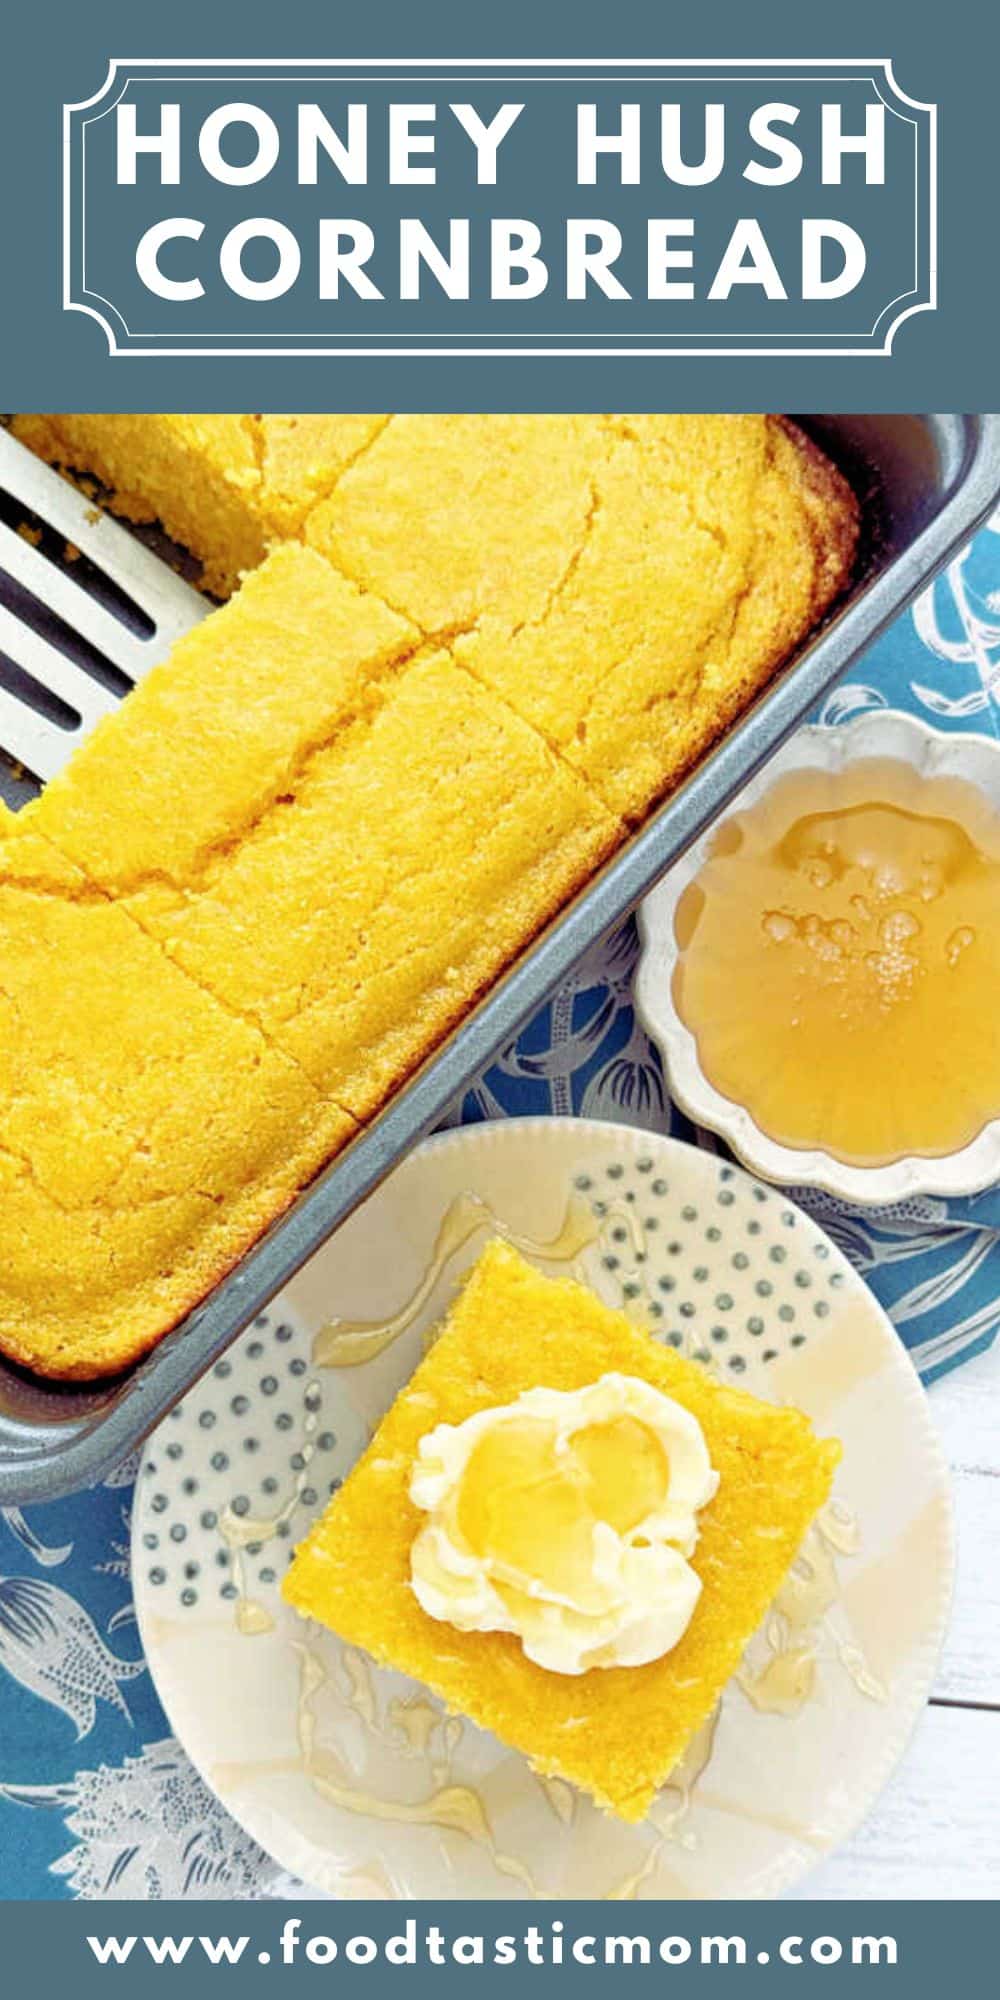 Honey Hush Cornbread is the original recipe from Dinosaur BBQ restaurant. It is hands down the best sweet cornbread I have ever made at home. via @foodtasticmom